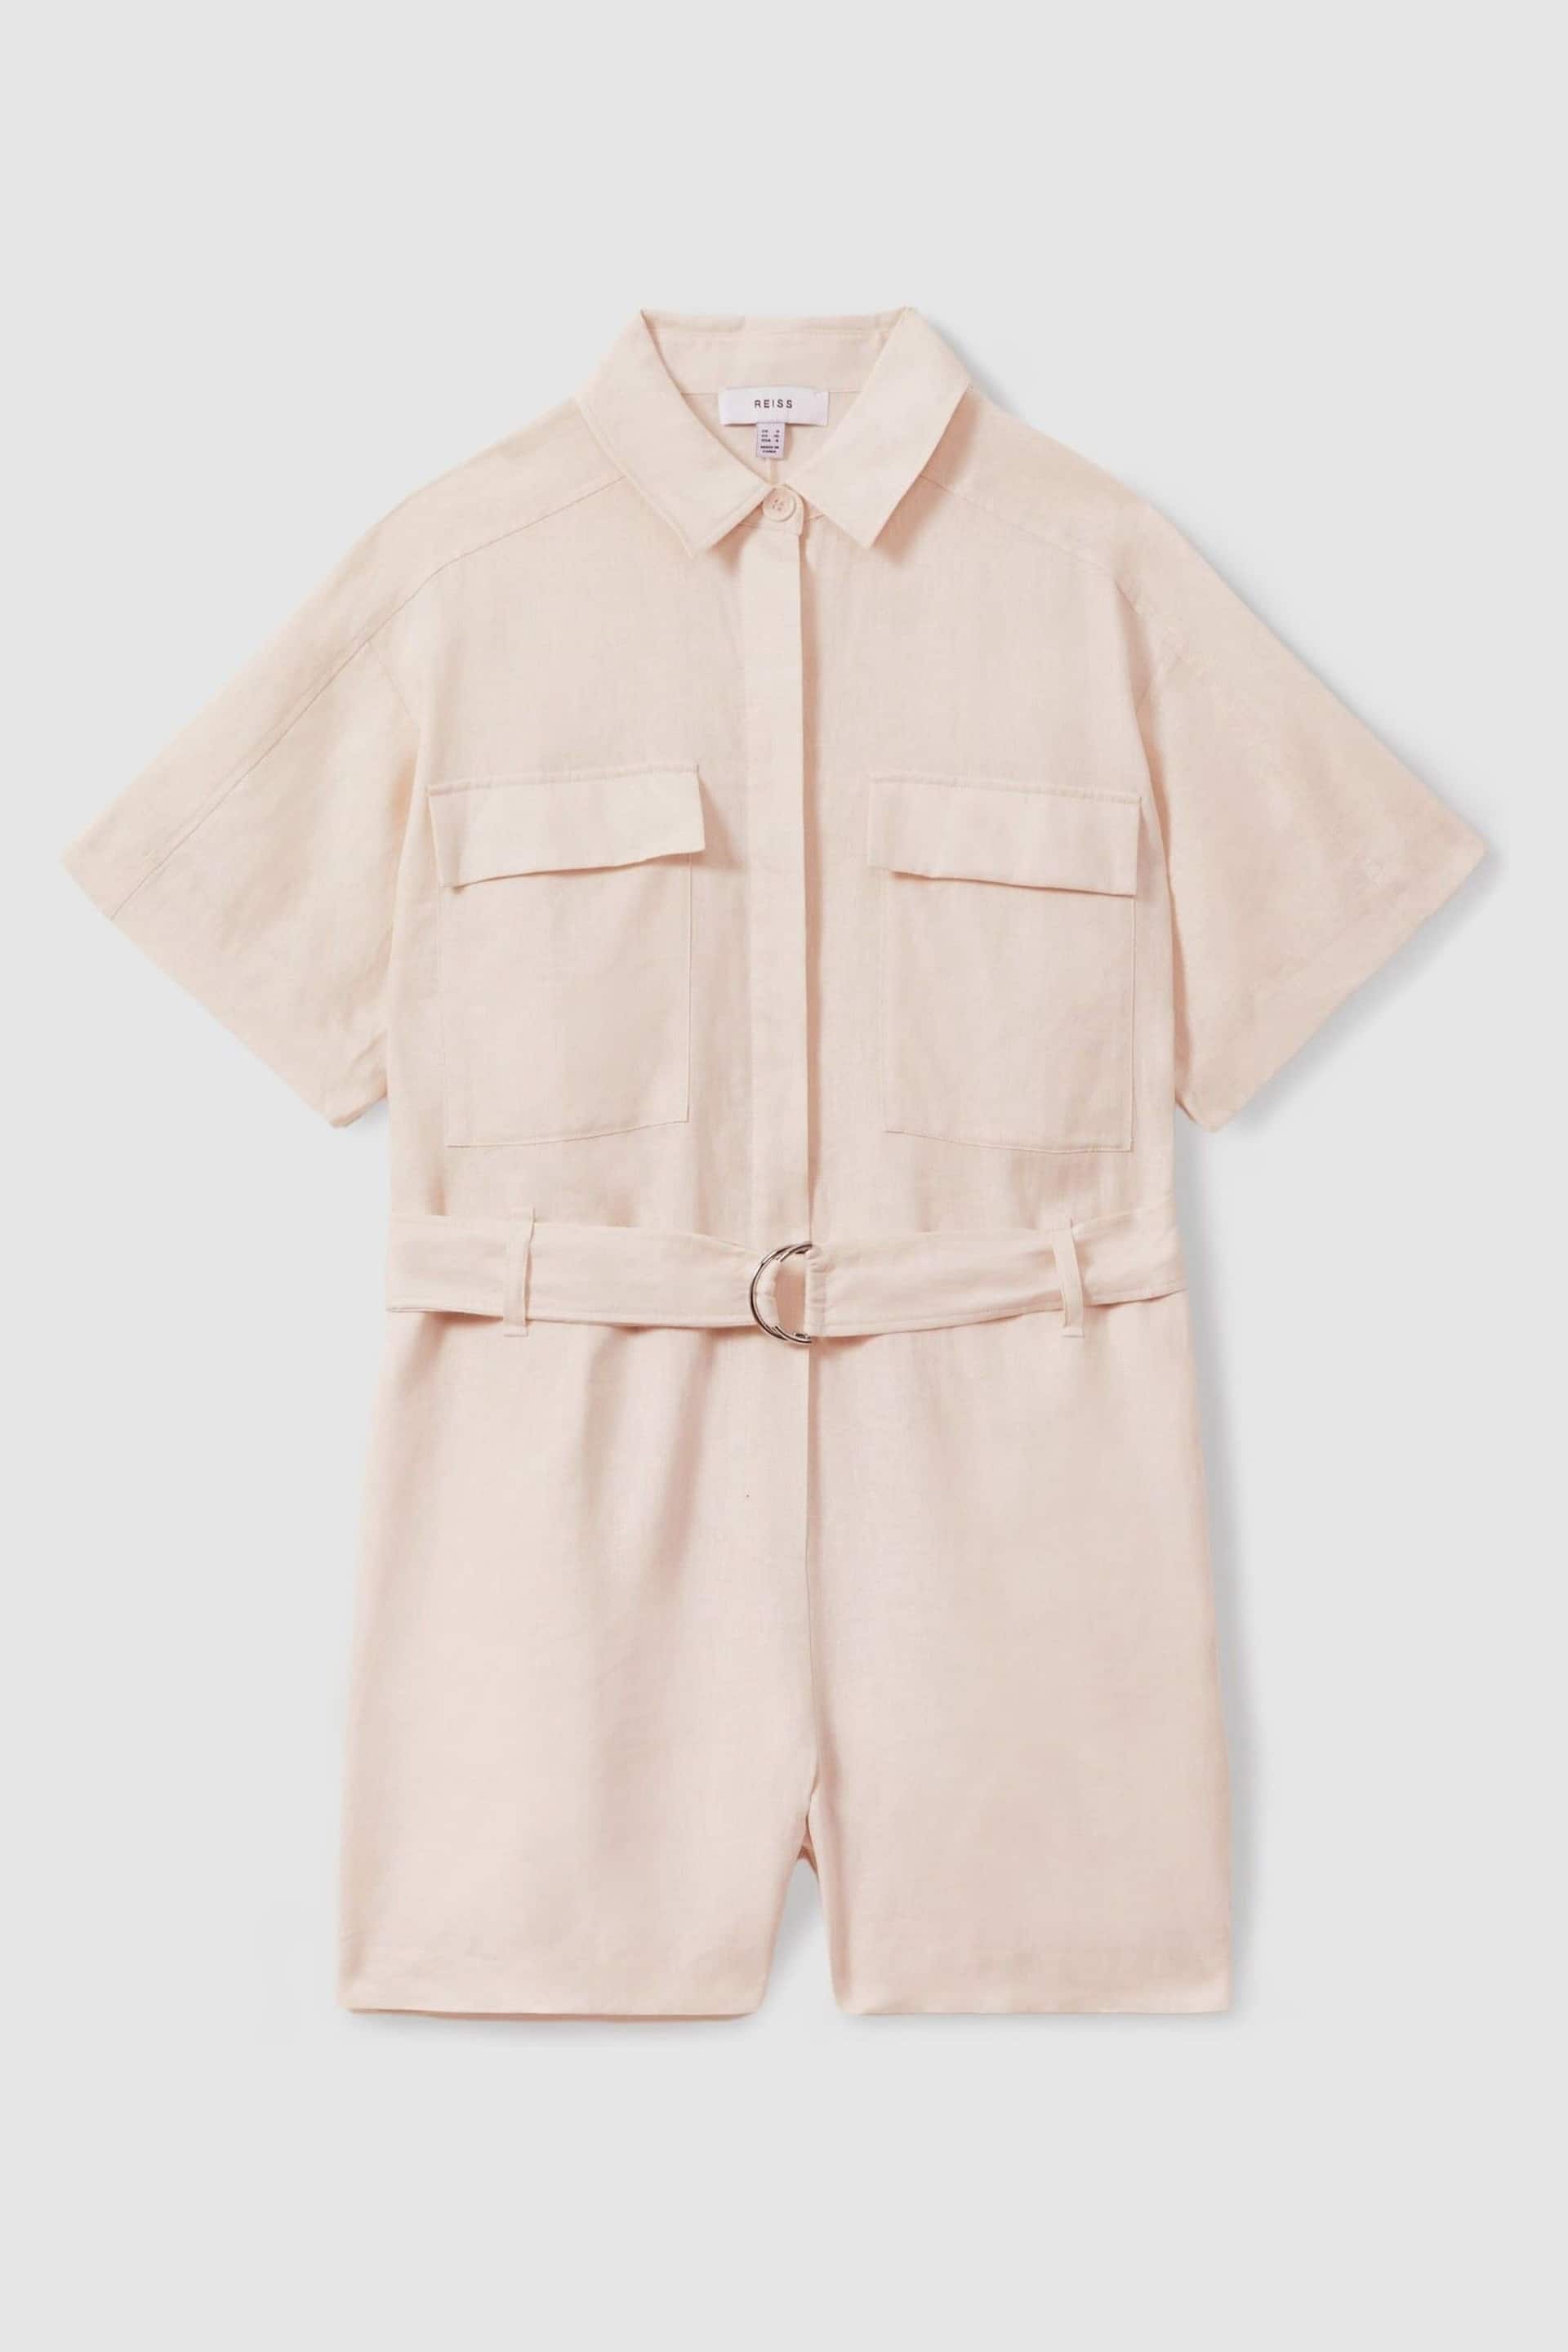 Reiss Pink Selina Linen Belted Playsuit - Image 2 of 5